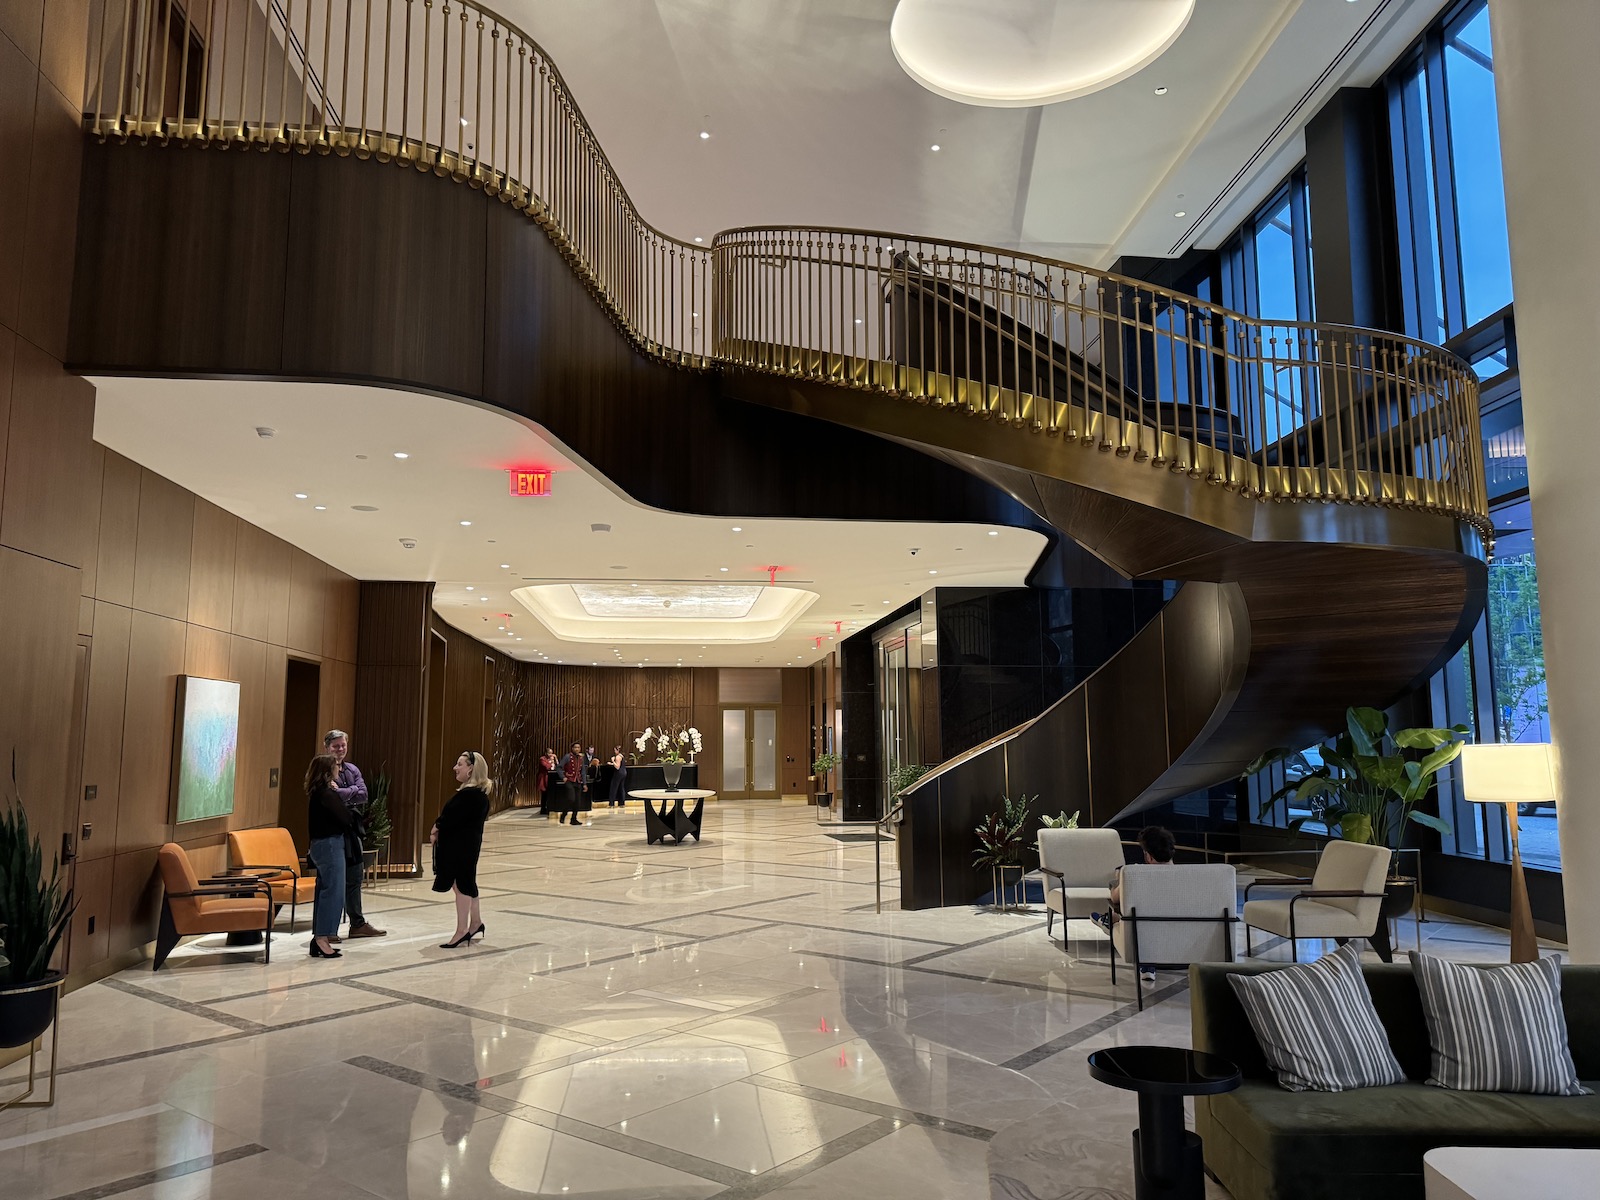 a large lobby with a staircase and people